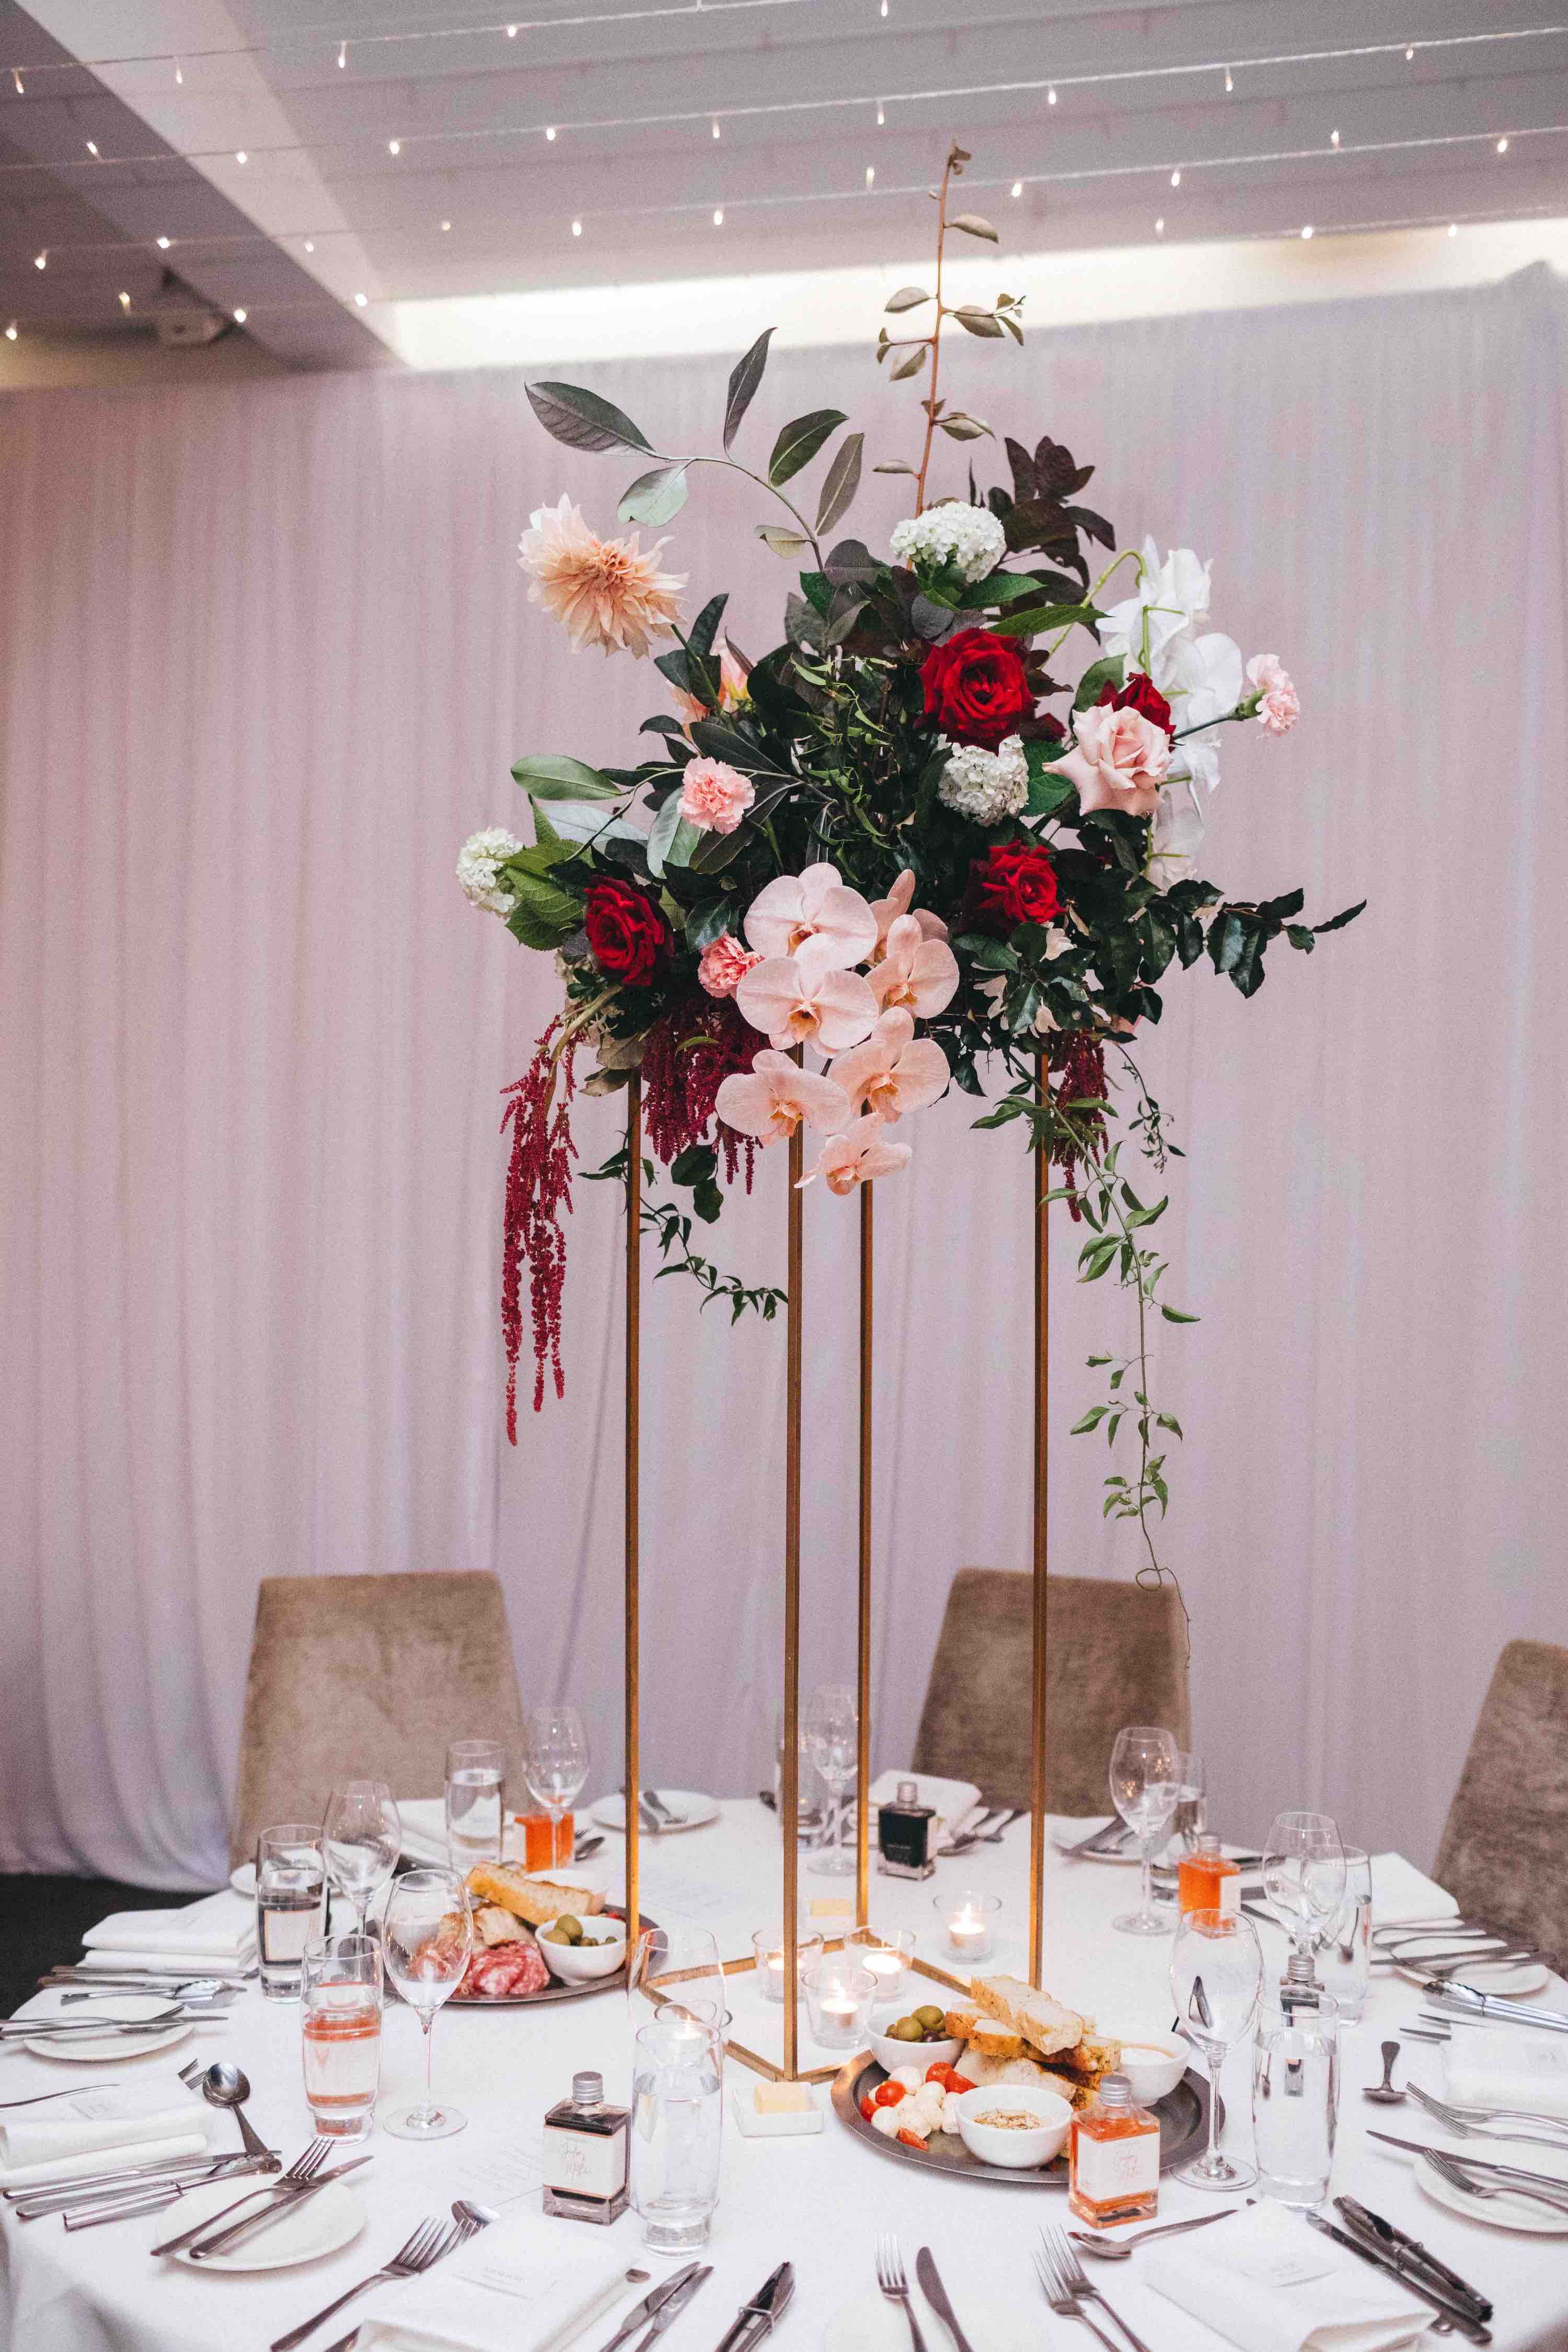 tall table flowers stand centrepiece sergeants mess